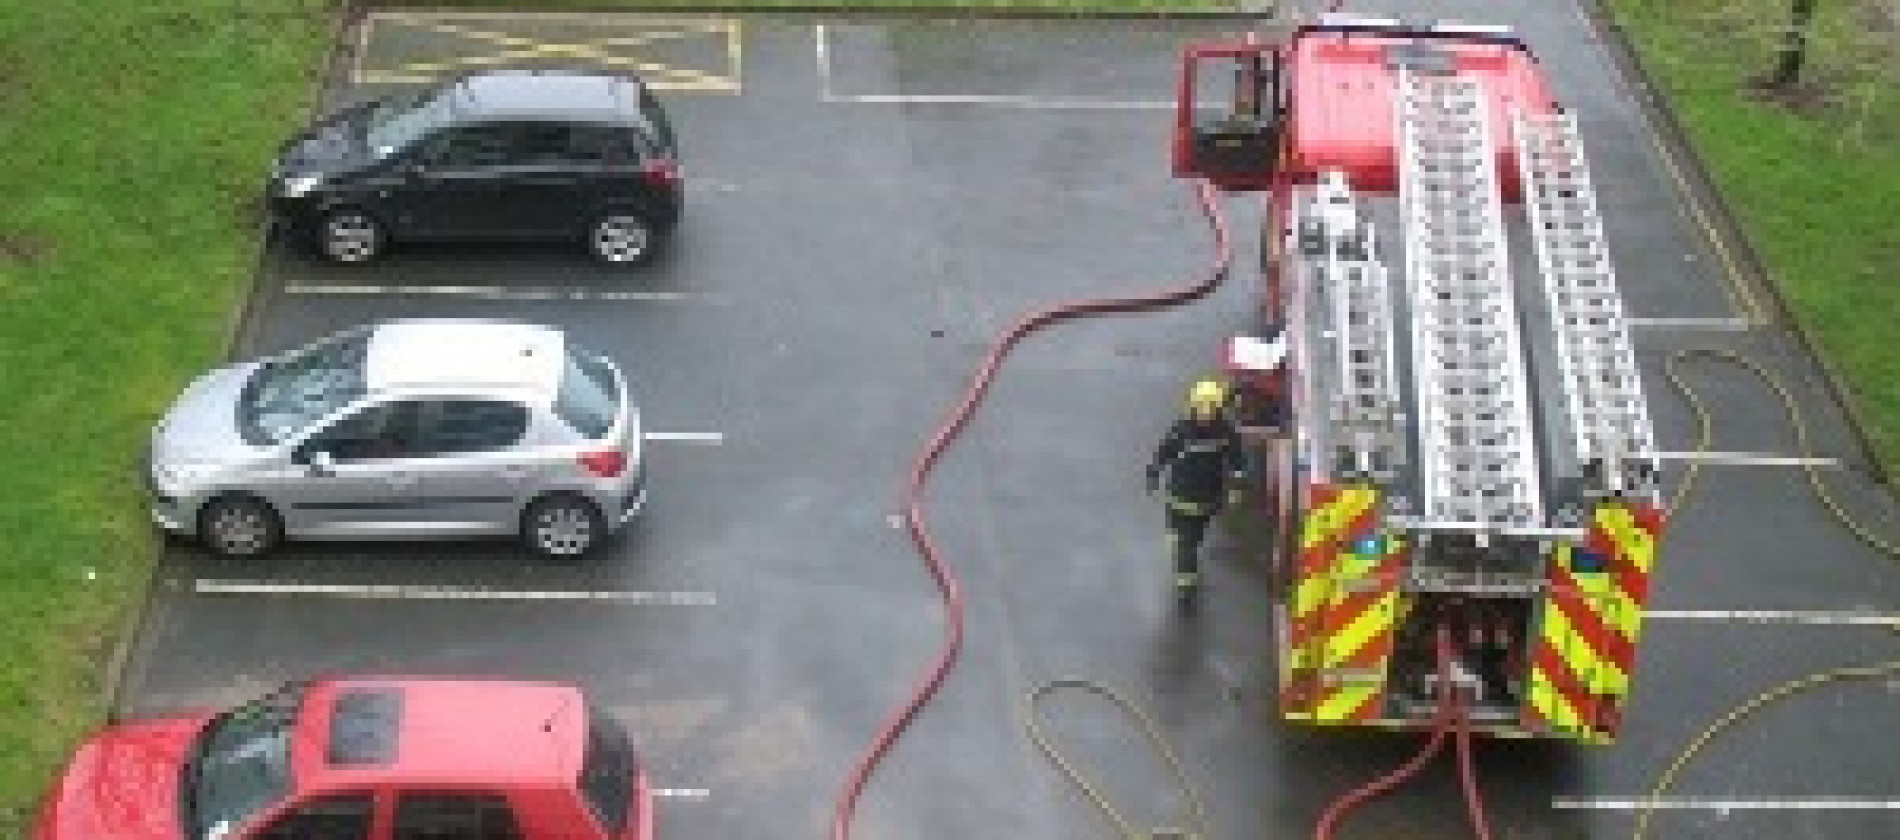 Fire and Rescue Training